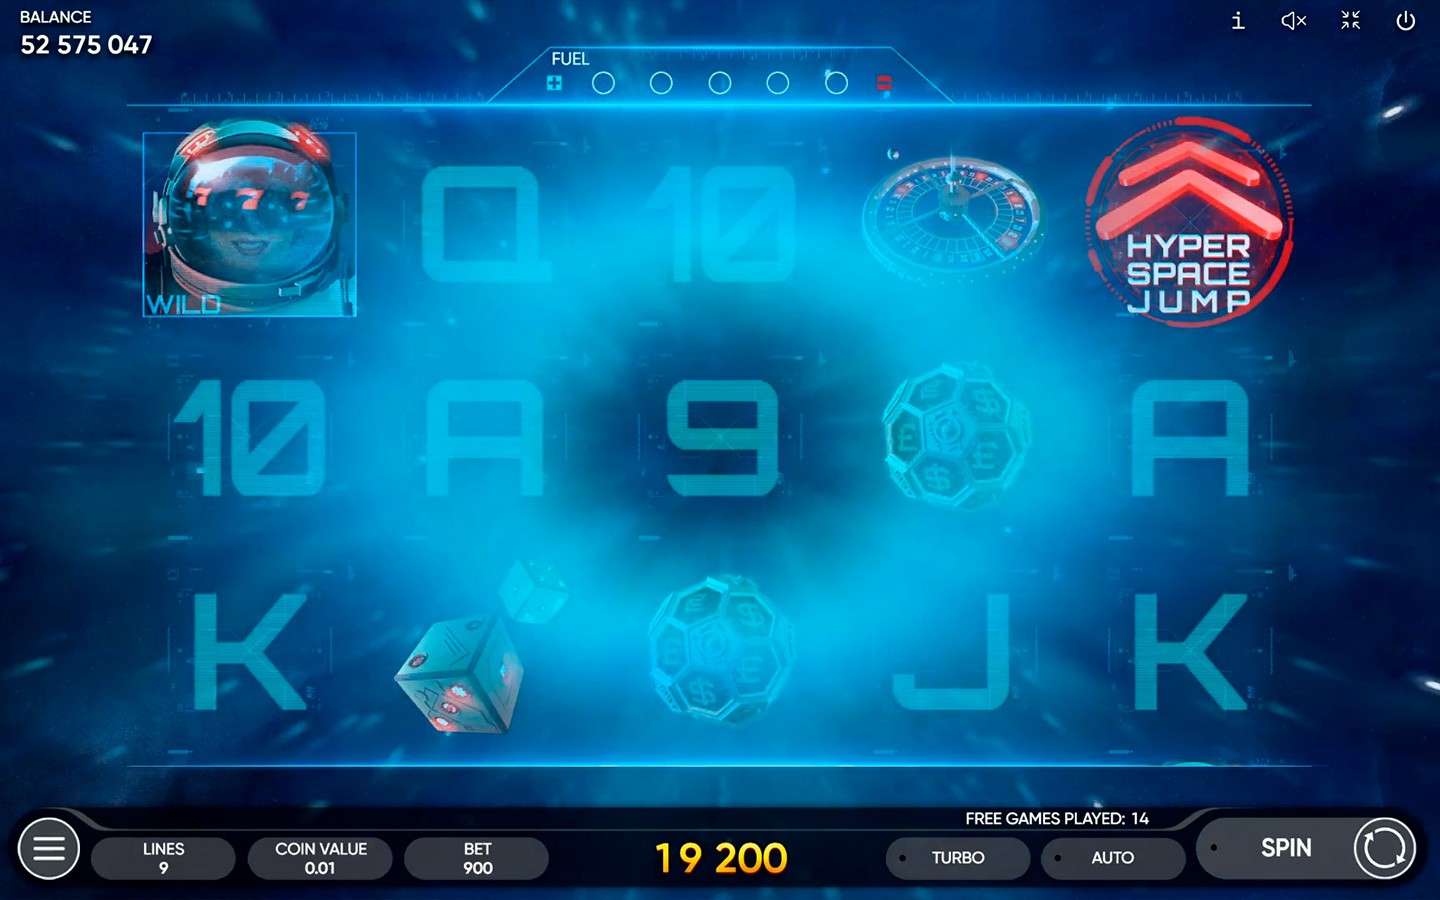 Play 2027 ISS slot by top casino game developer!